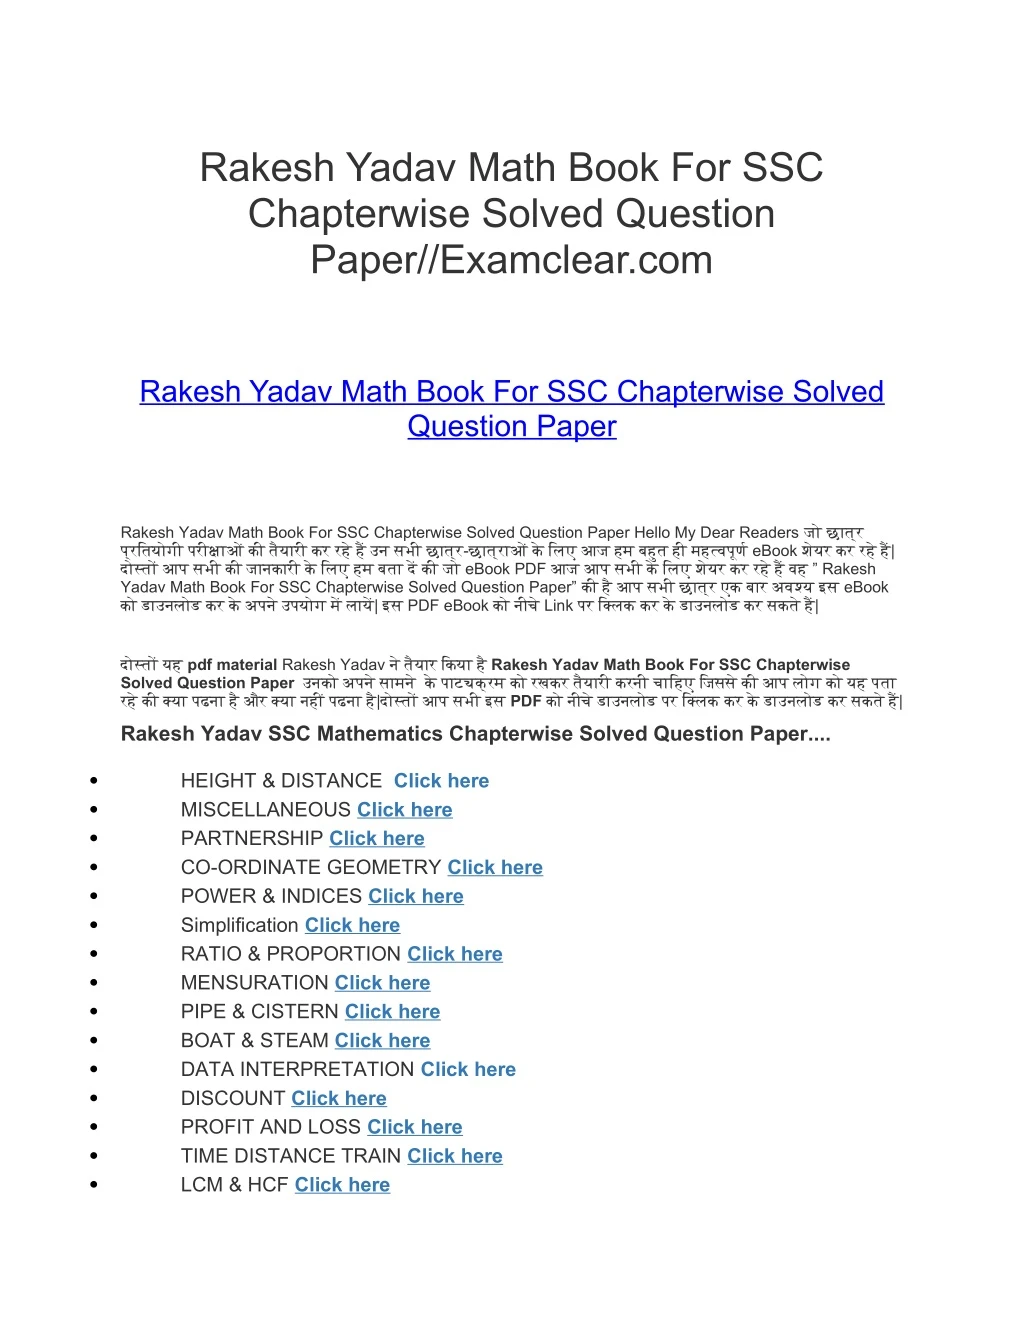 rakesh yadav math book for ssc chapterwise solved